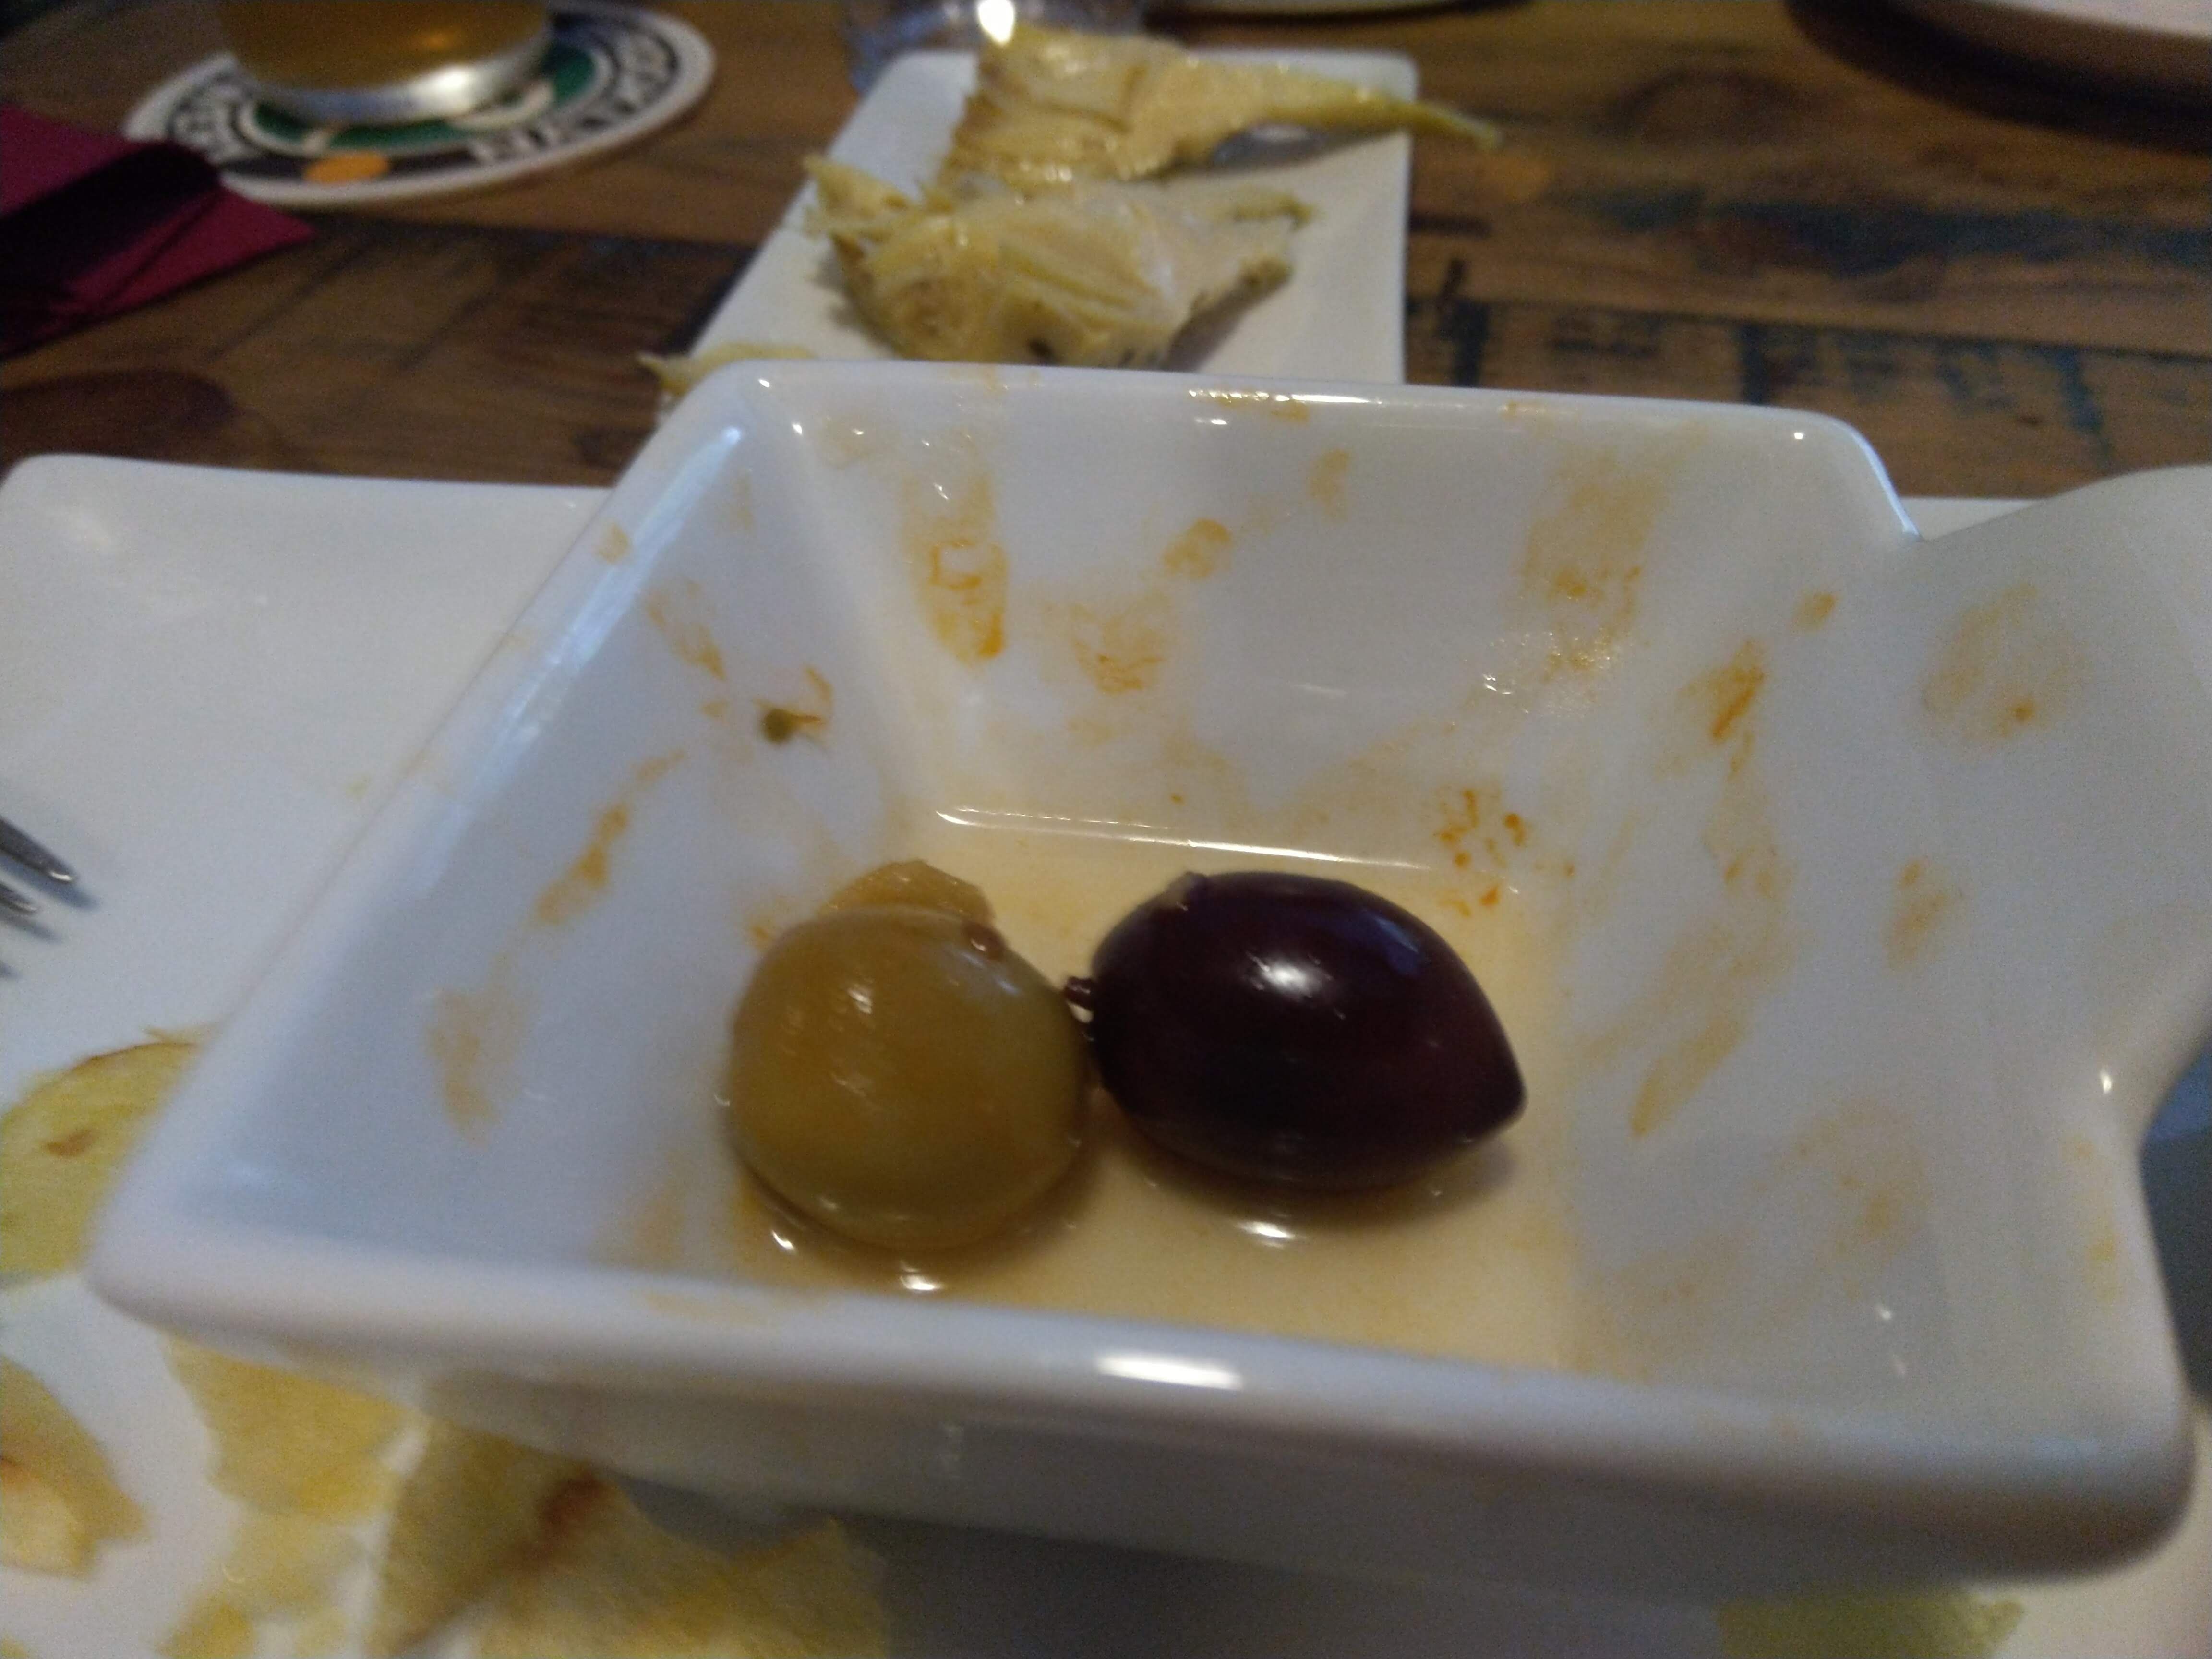 The Olives were very popular